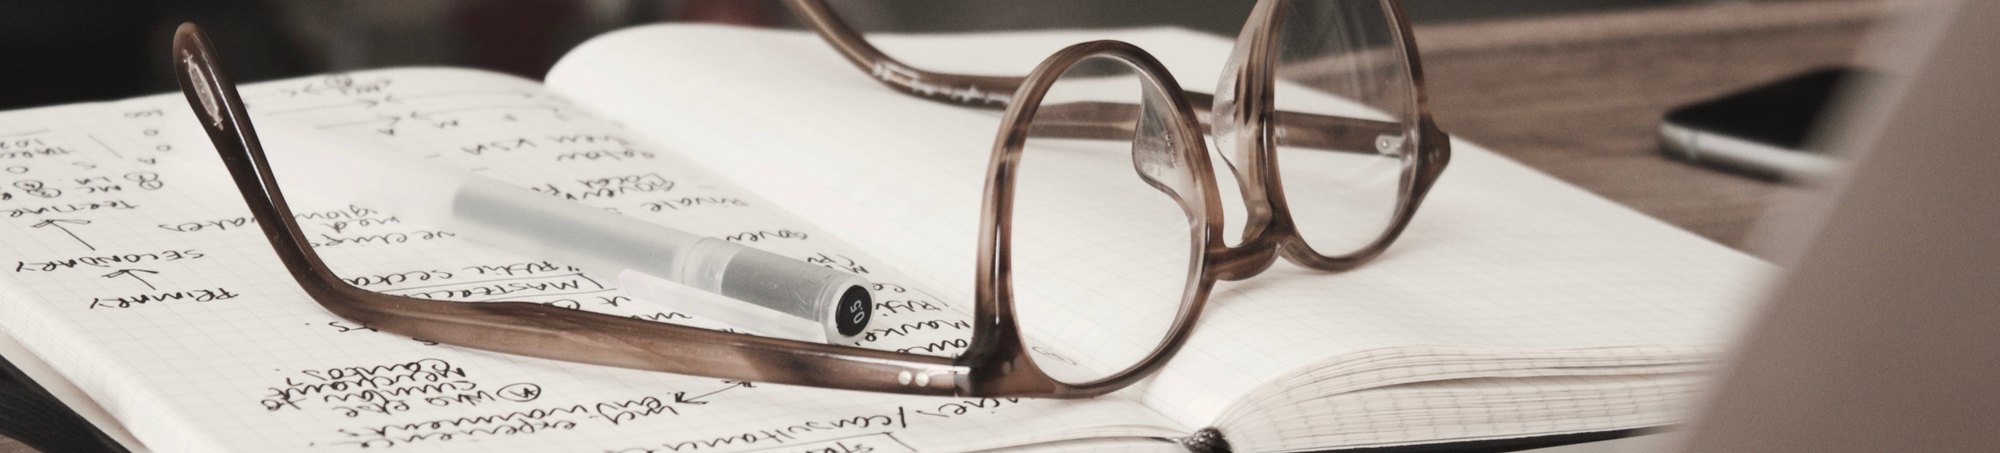 An image of glasses atop a notebook to suggest that gathering consumer perception could lead to actionable insights